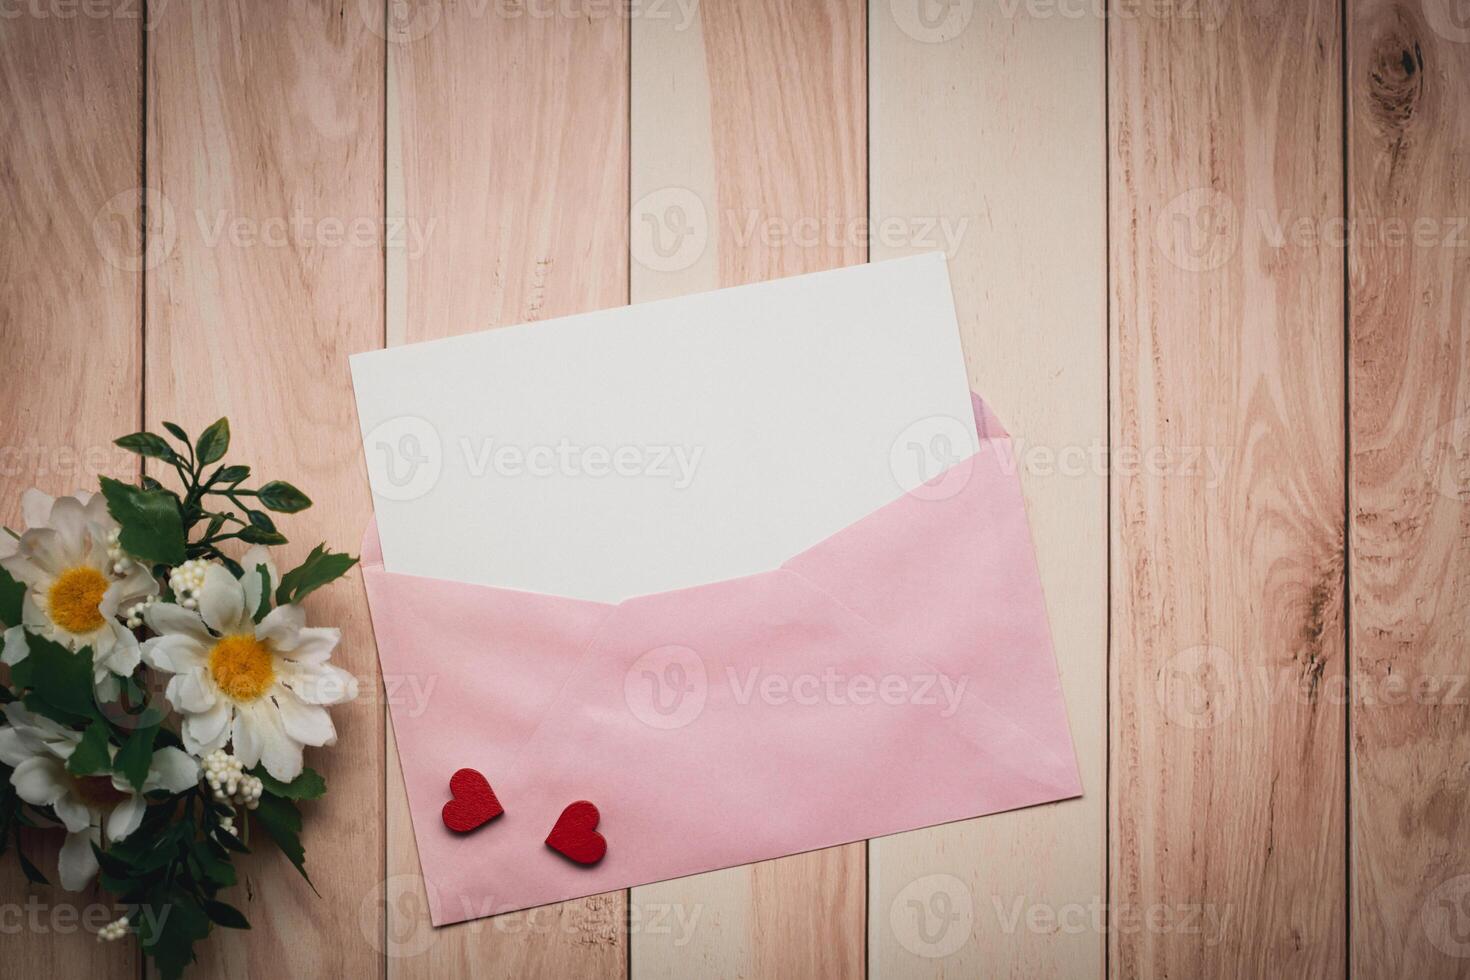 A pink envelope and a white card with a red heart and daisy are placed on a wooden table photo